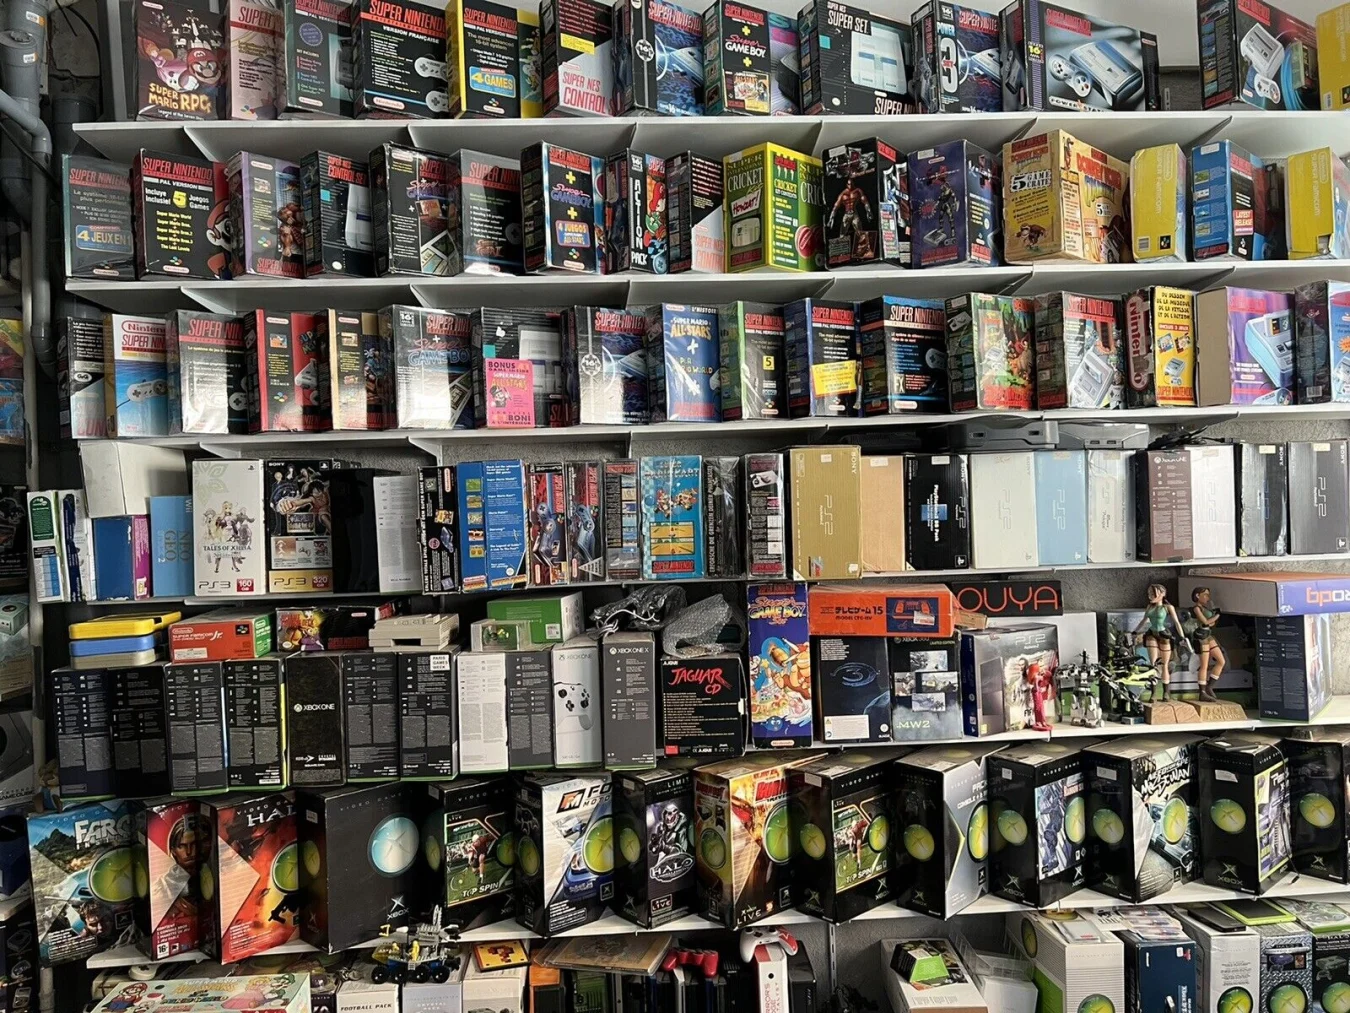 A video game console collection, including Nintendo and Xbox products.